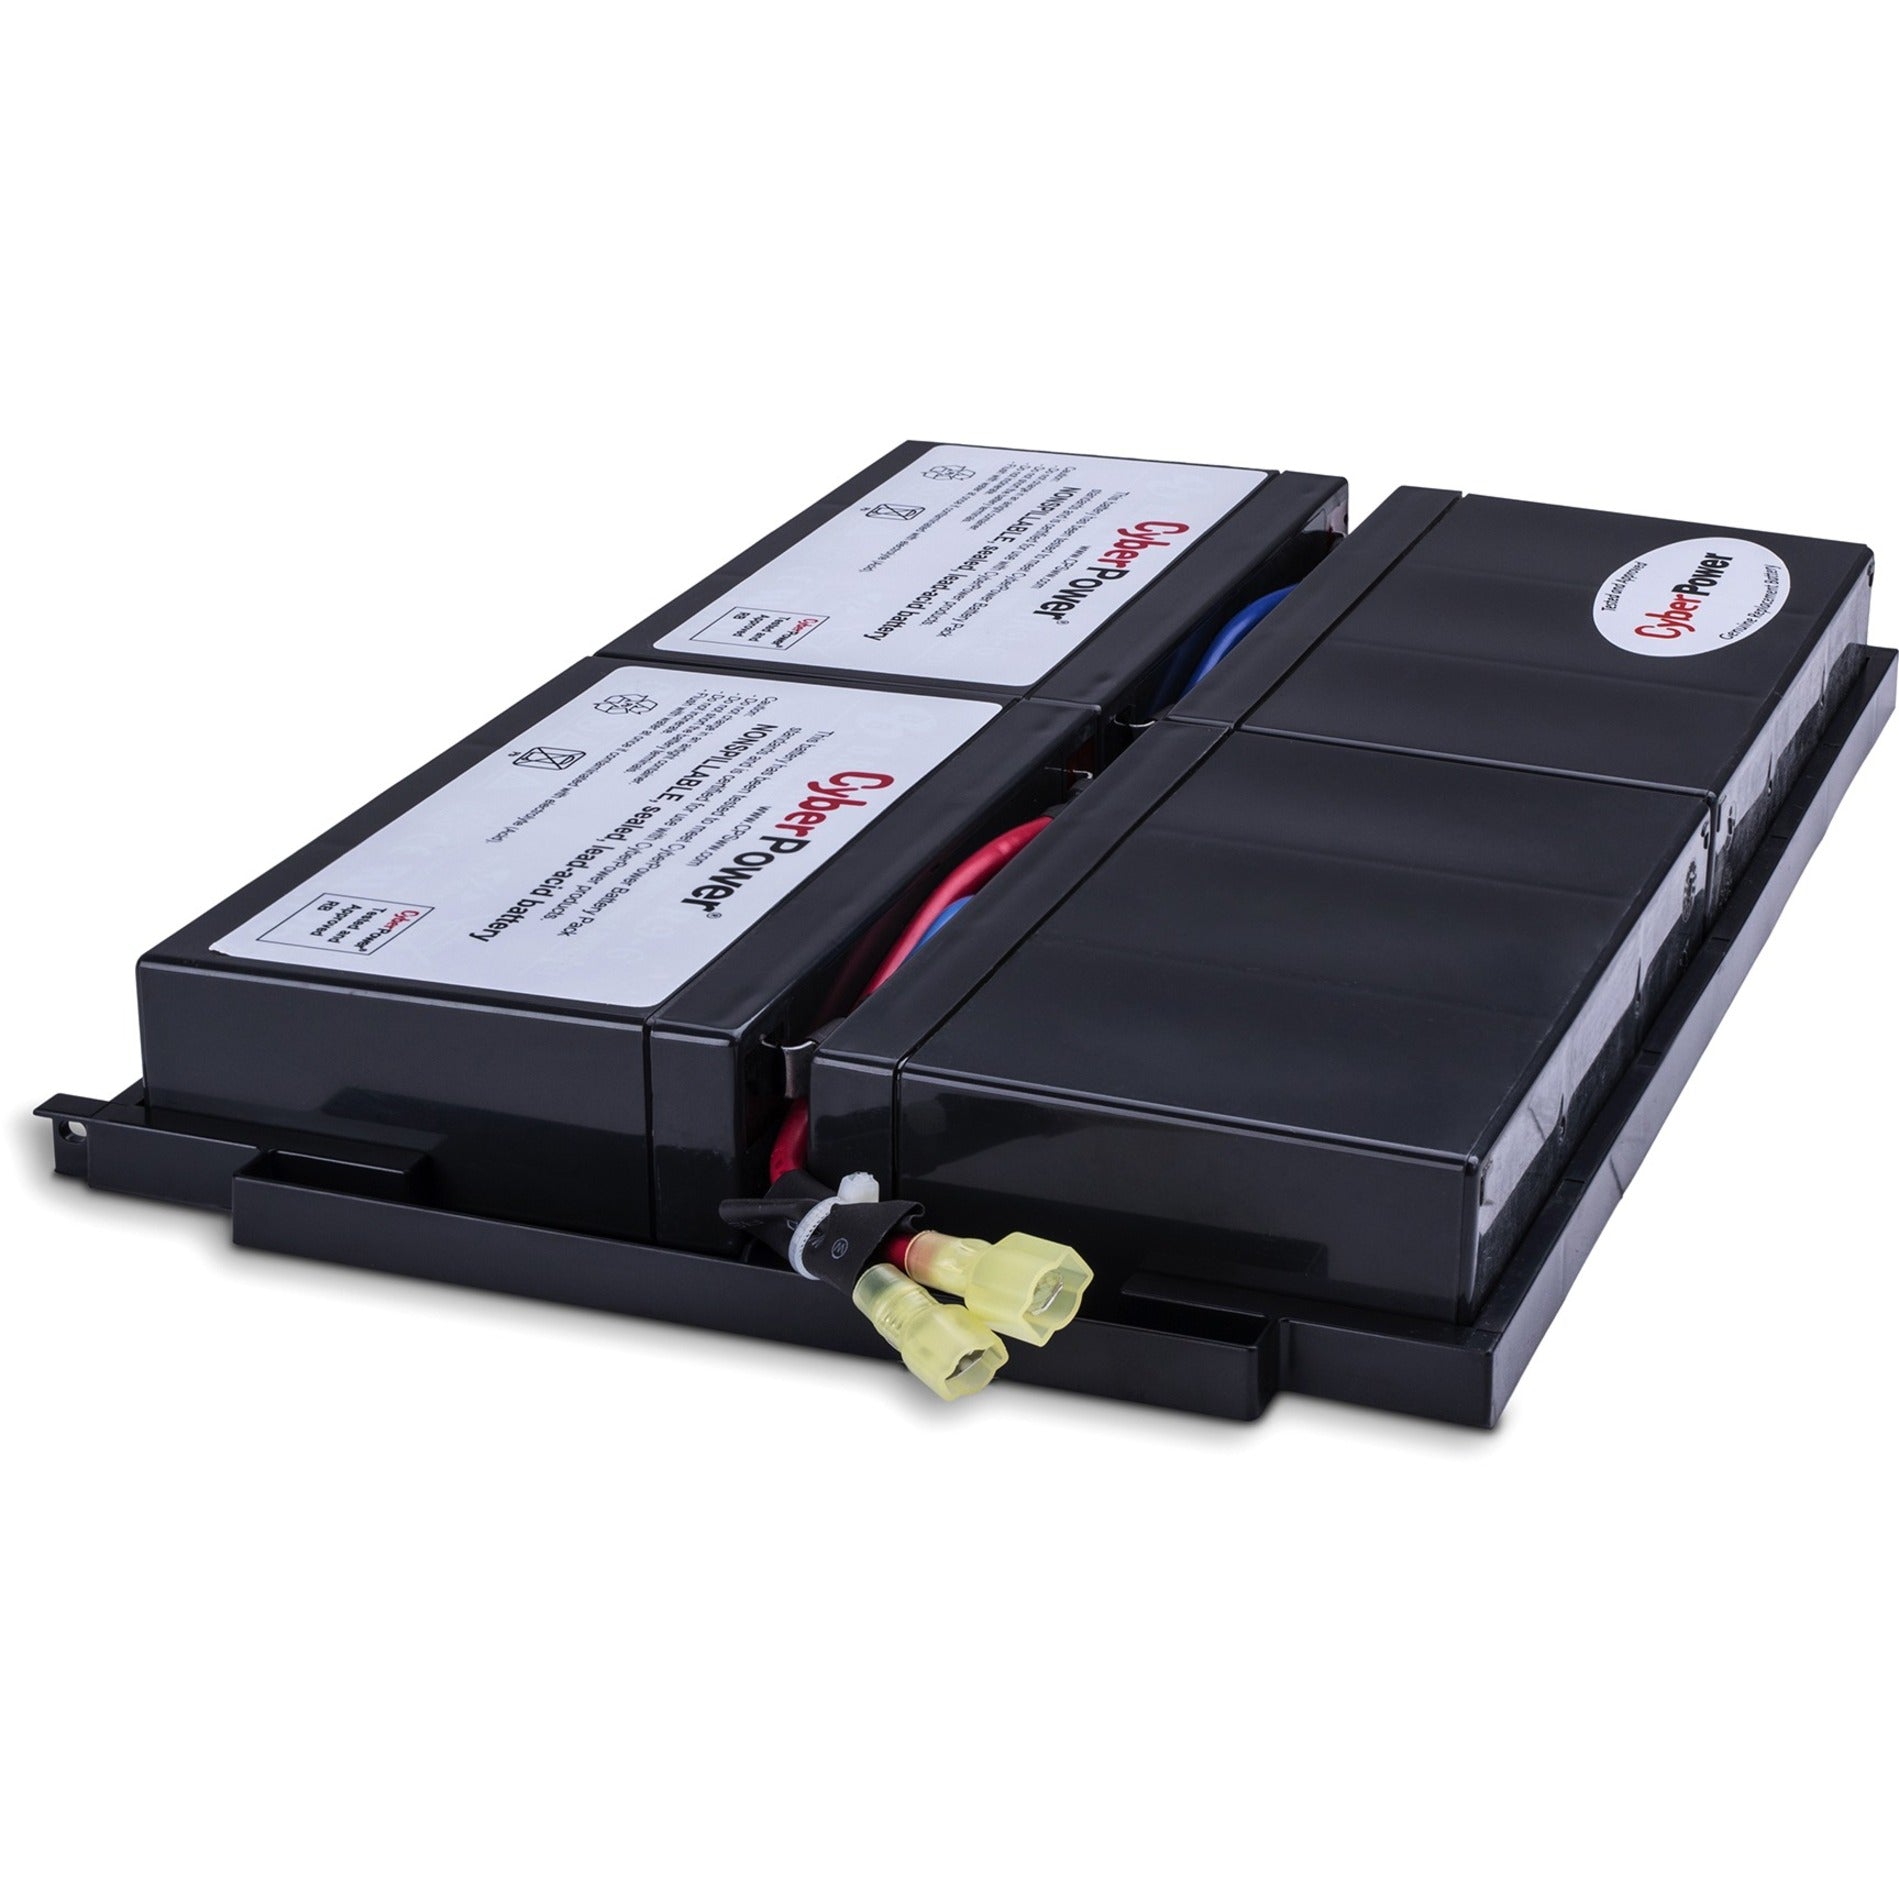 CyberPower RB0690X4 UPS Replacement Battery Cartridge, 6V DC, 9000mAh, Lead Acid, Maintenance-free